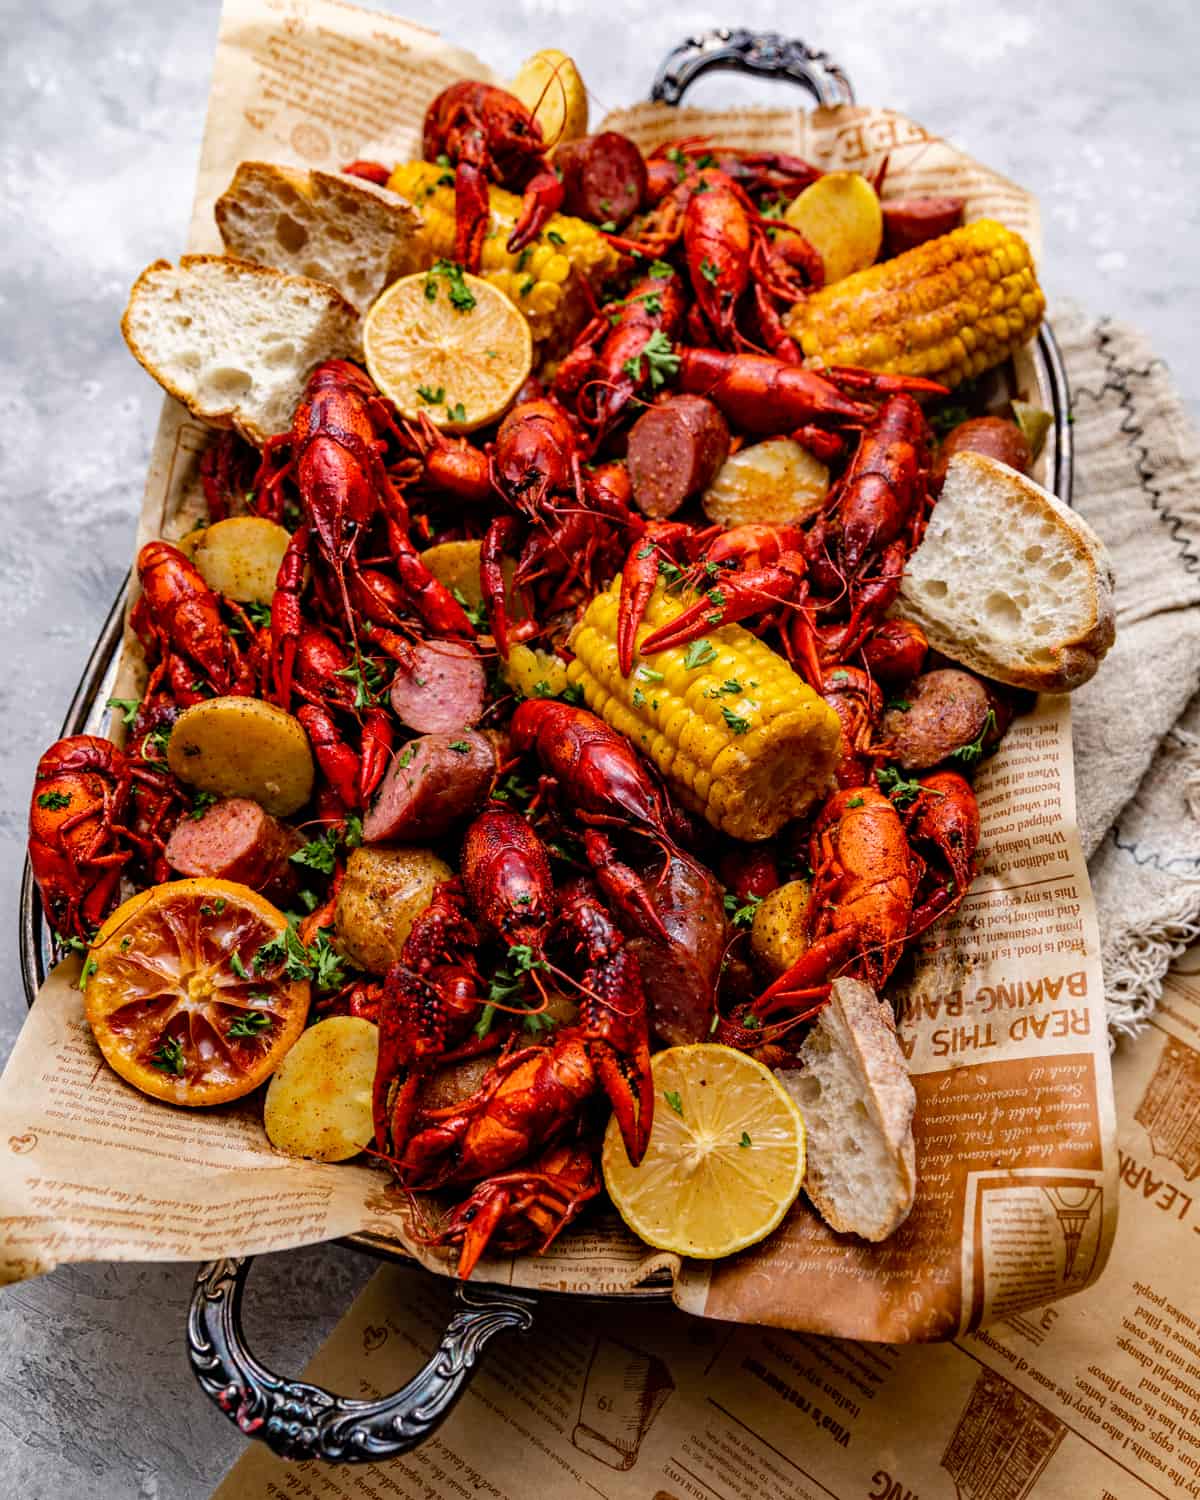 crawfish, corn, potatoes, and sausage on a large tray with fresh bread garnished with parsley.